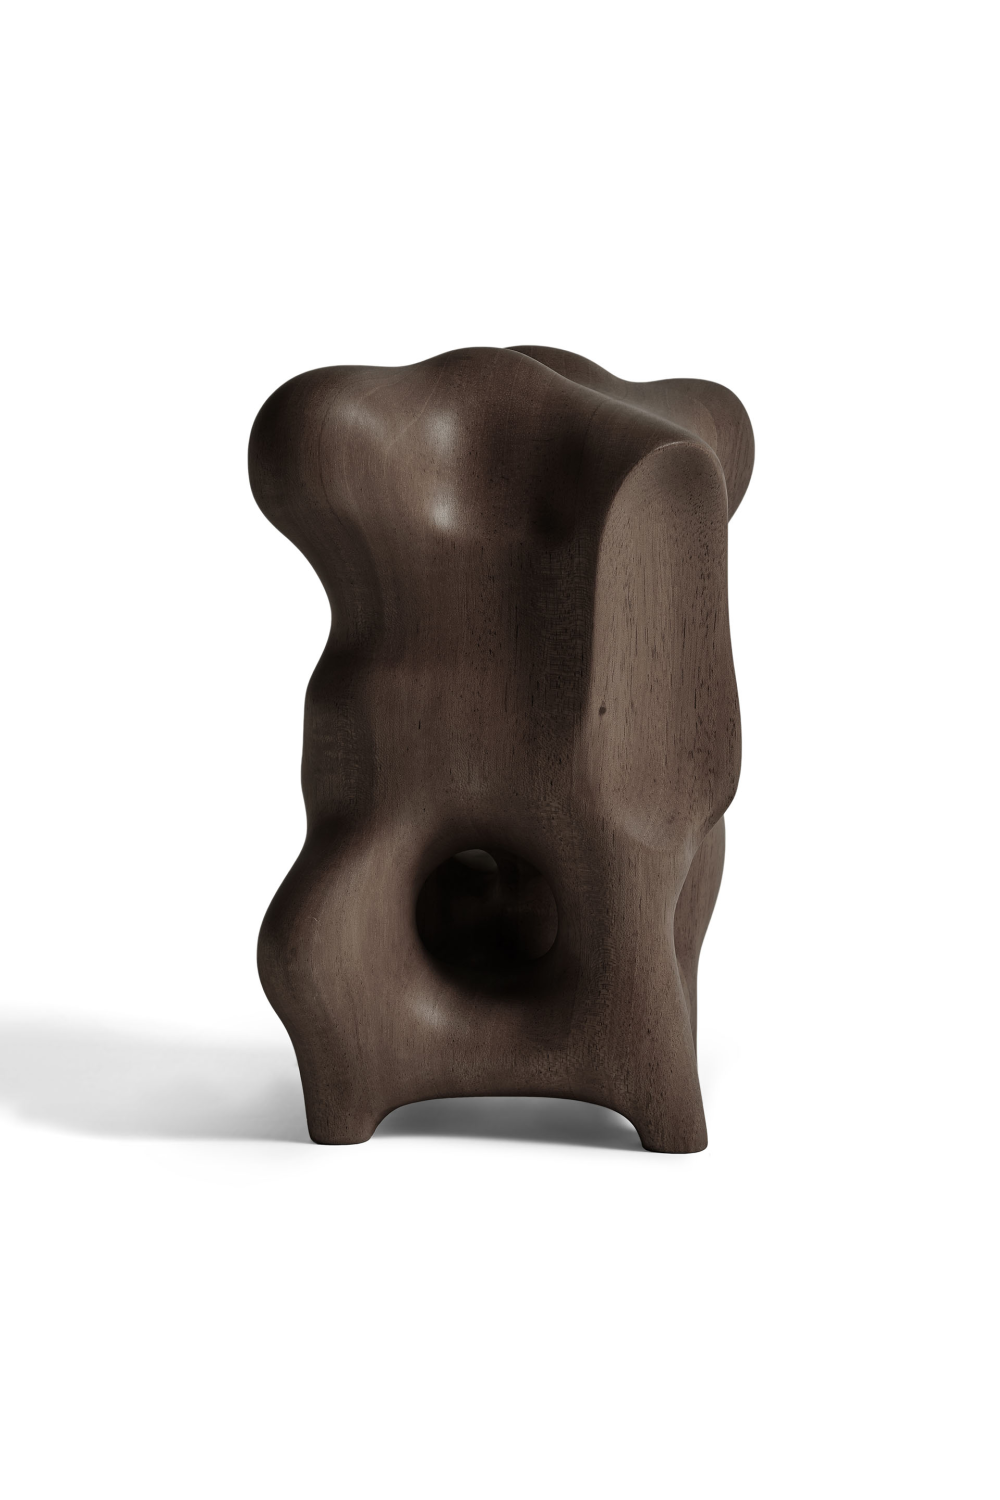 Varnished Sycamore Abstract Sculpture | Ethnicraft Organic | Oroa.com